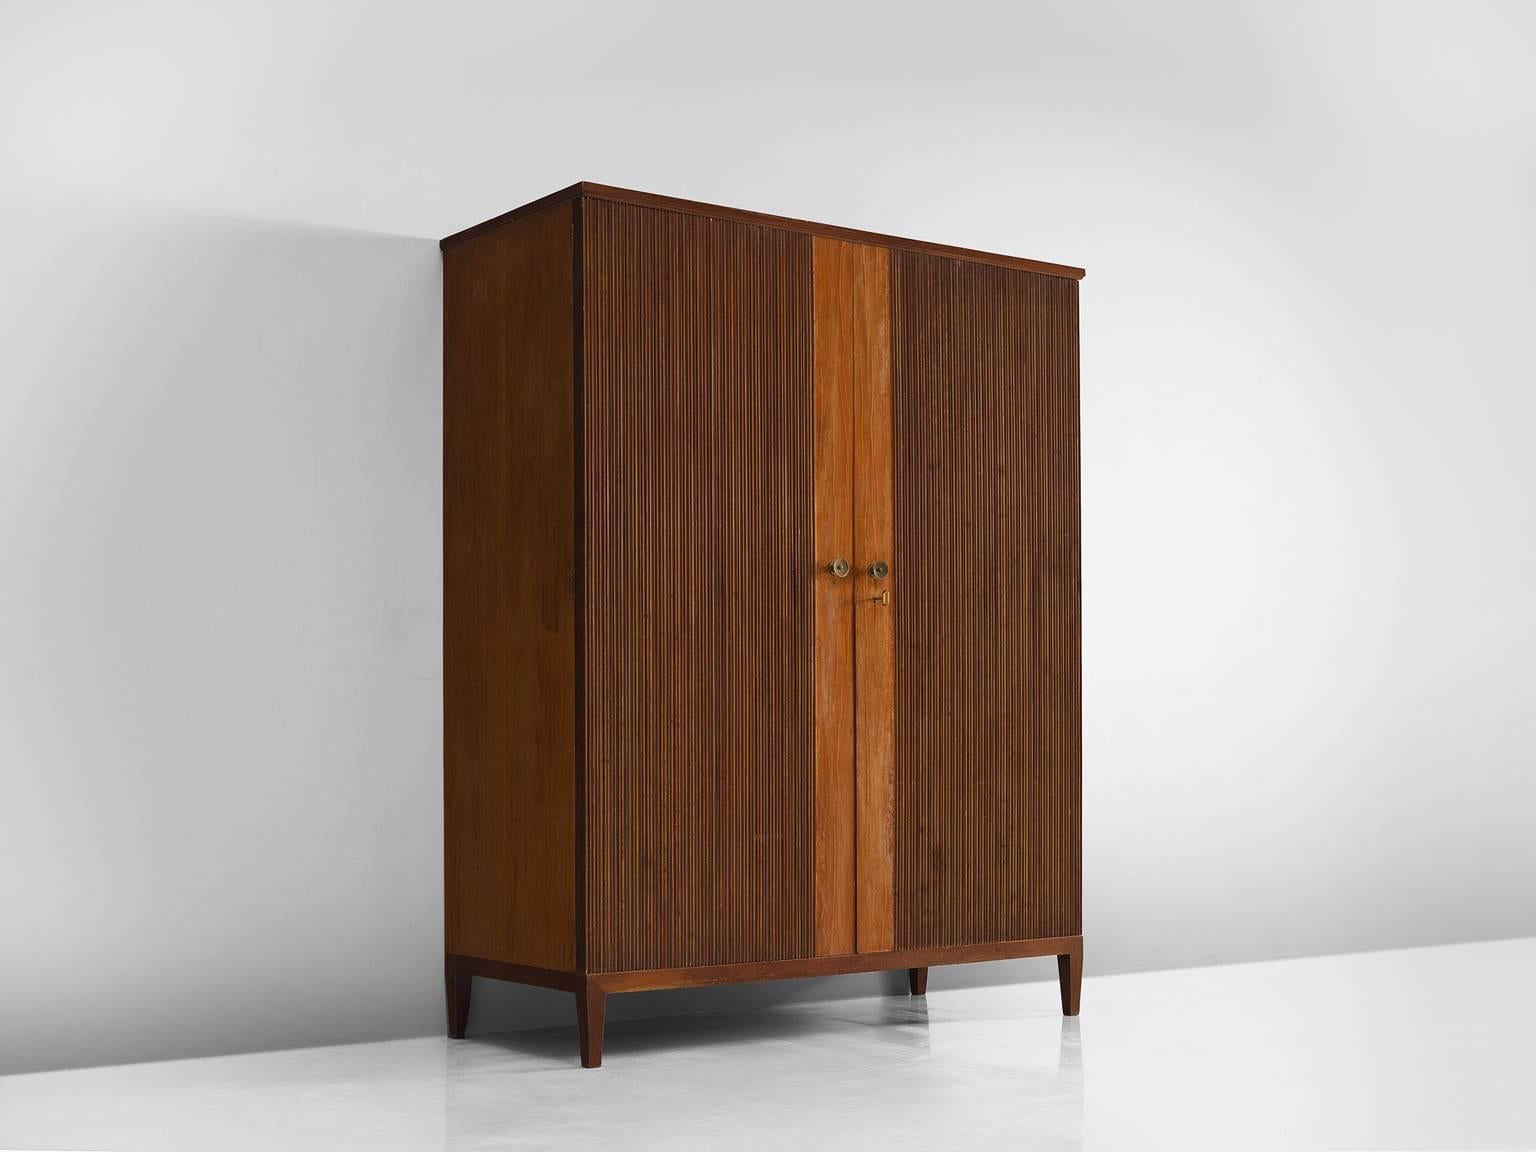 Set of cabinets, oak, brass, Europe, 1950s.

This set of two oak cabinets is are simplistic yet refined. The details are what make this midcentury chest stand out. The front is carved and shows a ribbed oak stained from. The middle section of the